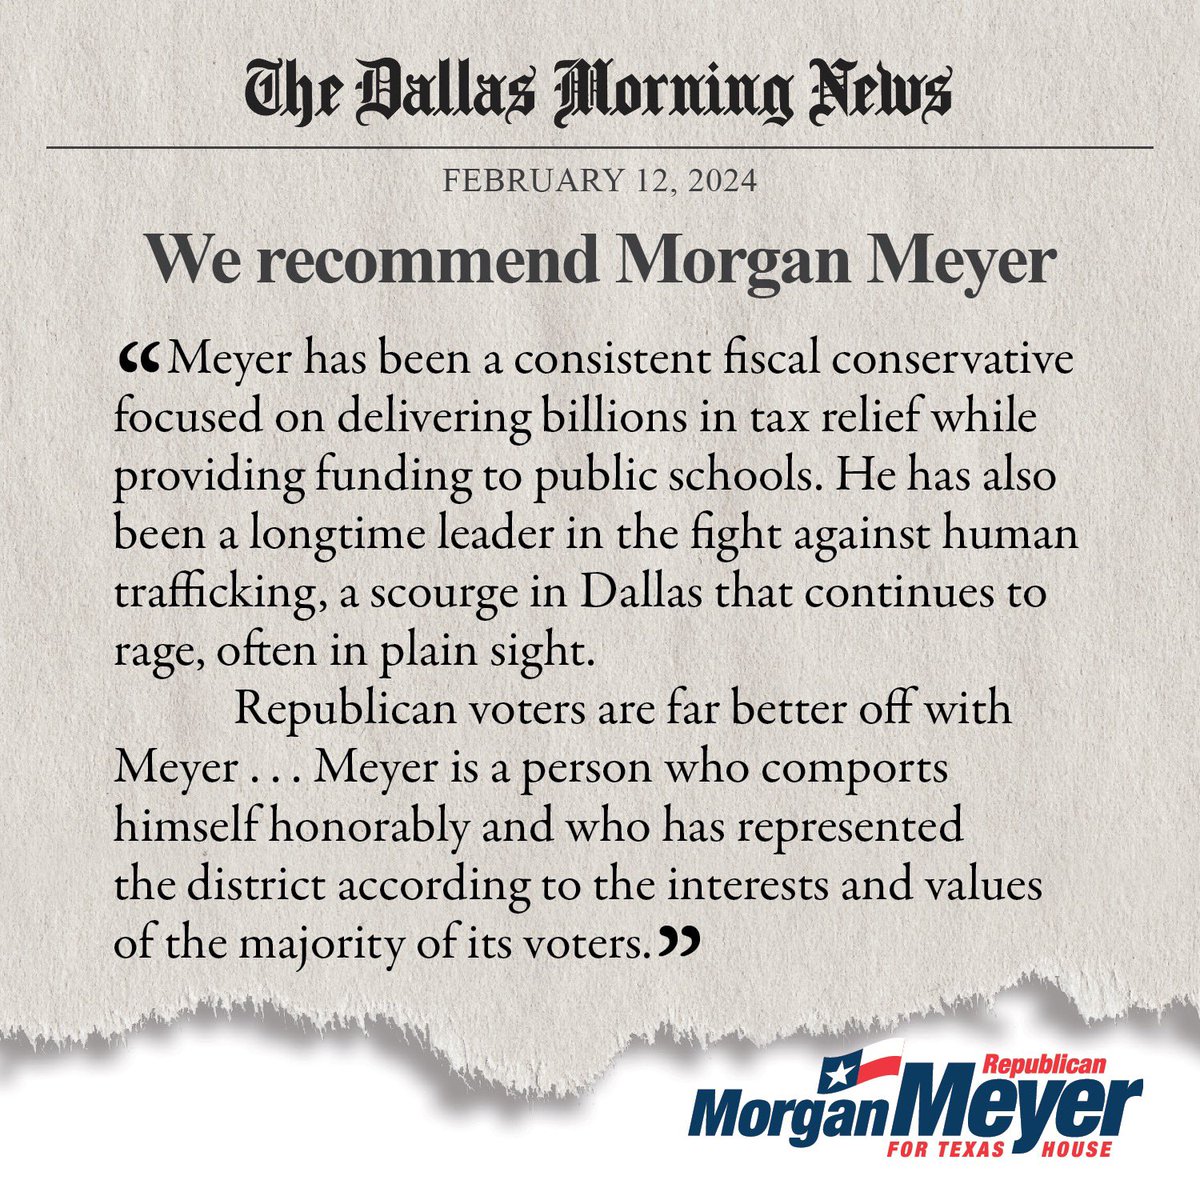 As our state rep., my job is to listen. When I heard time & time again that property taxes were too high, I worked with our leadership in Austin to deliver historic property tax relief. With your support in the March 5 GOP primary, I’ll keep listening & working for our community.